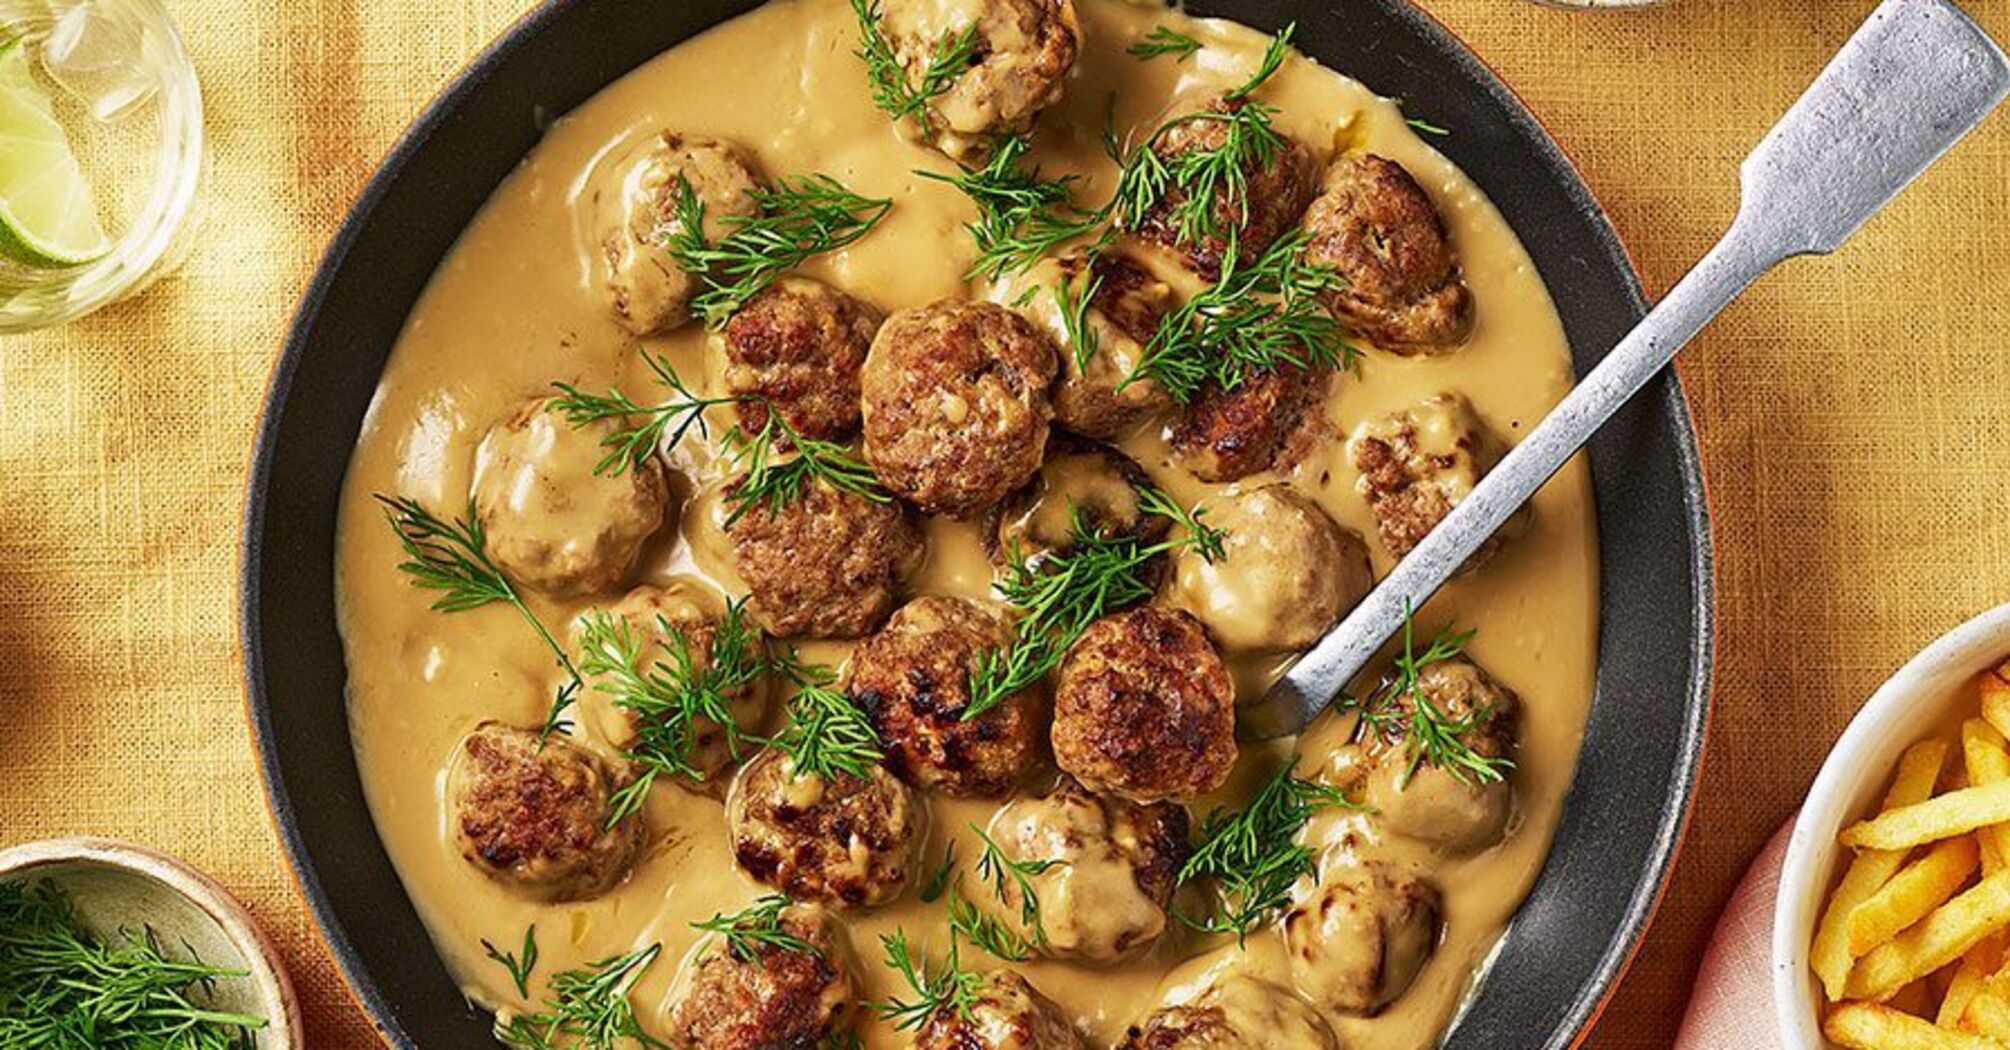 Potato dumplings with meatballs: you can use yesterday's mashed potatoes